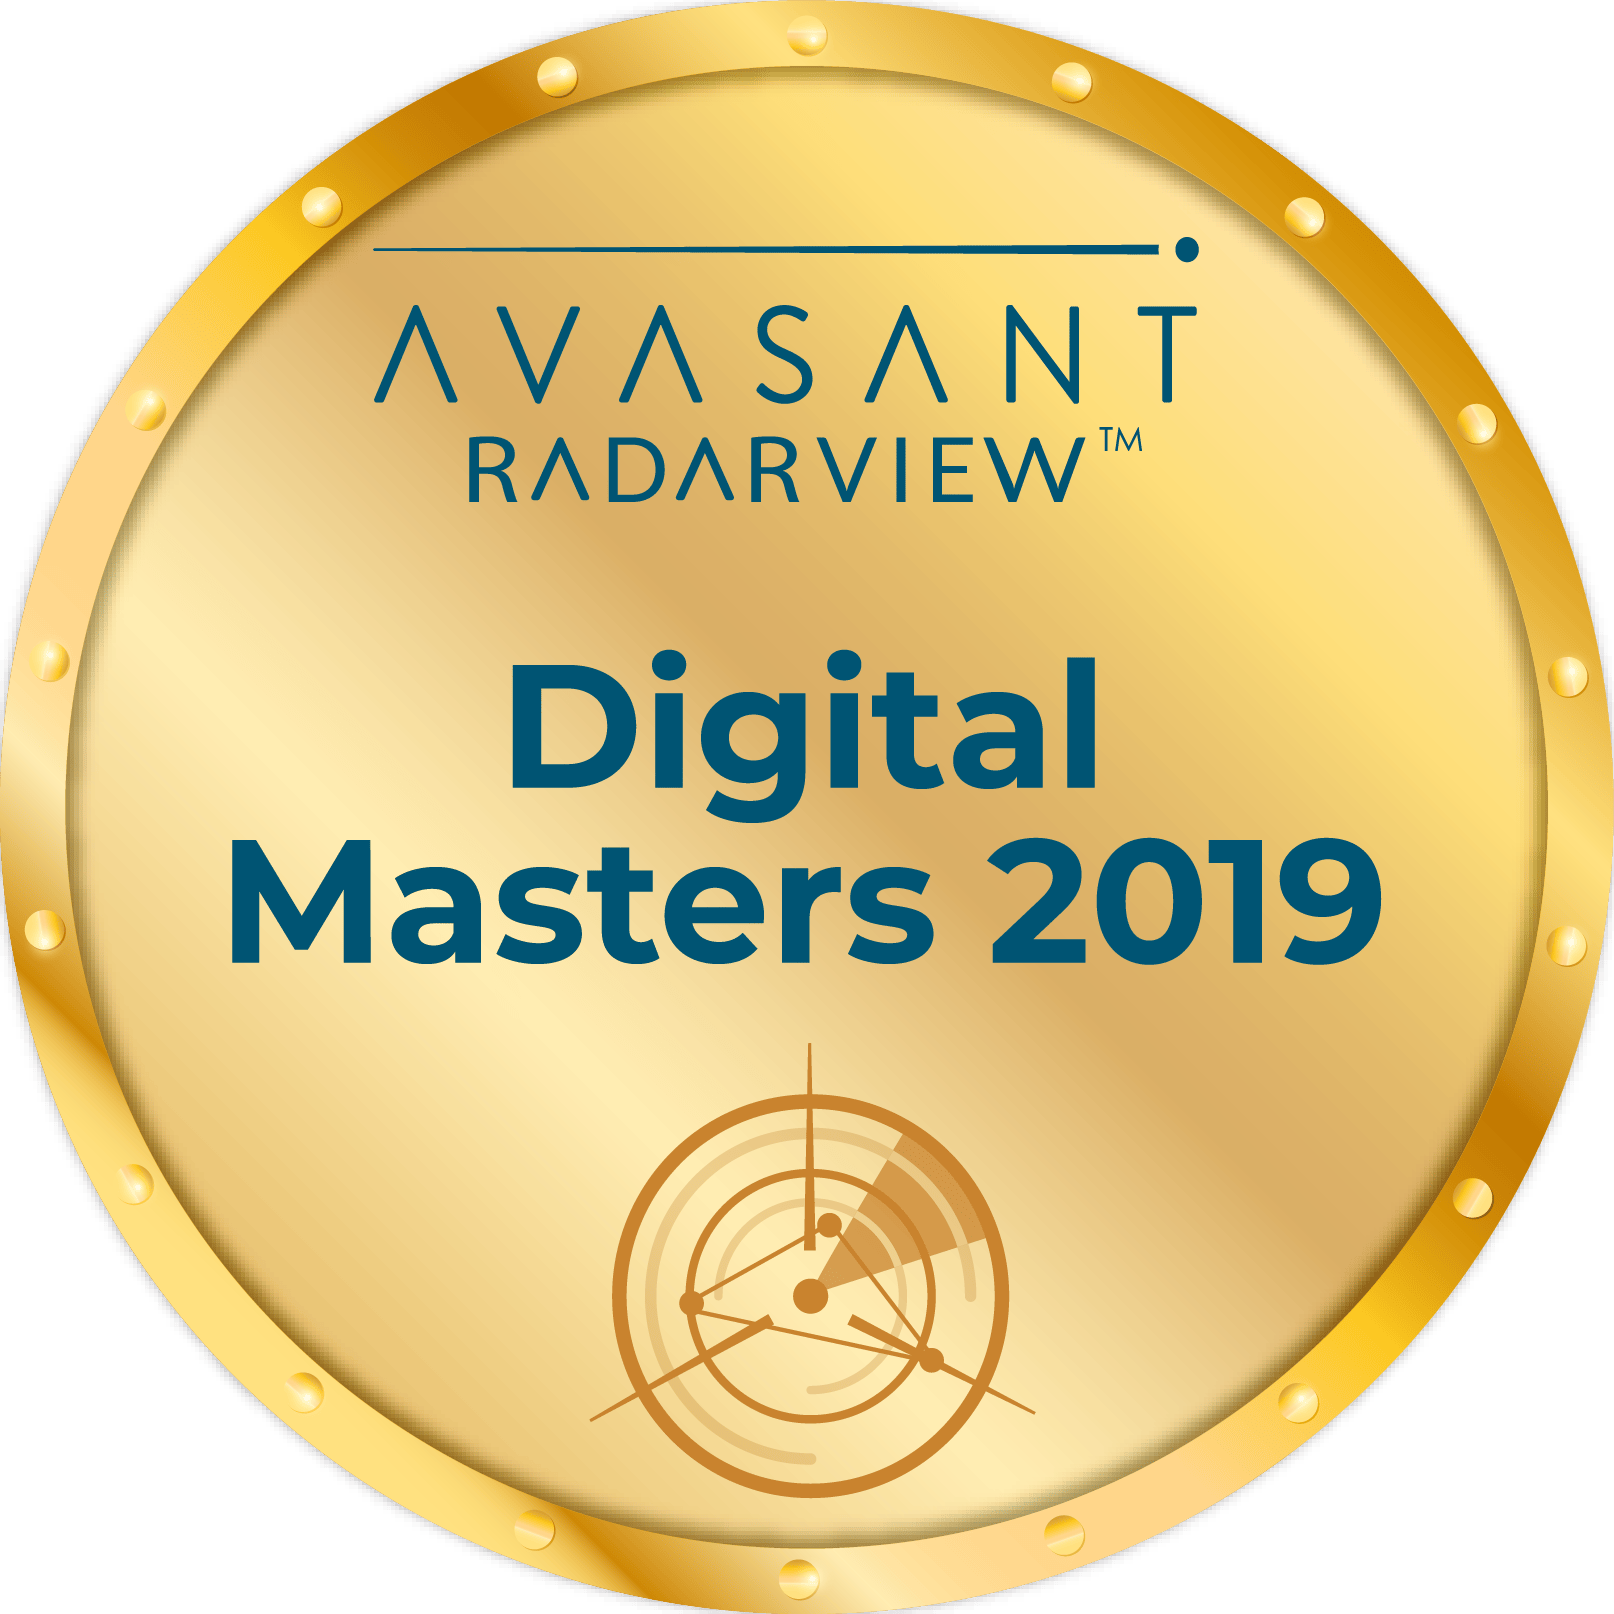 Round Badge Digital Masters 2019 - Old What We Do RadarView™